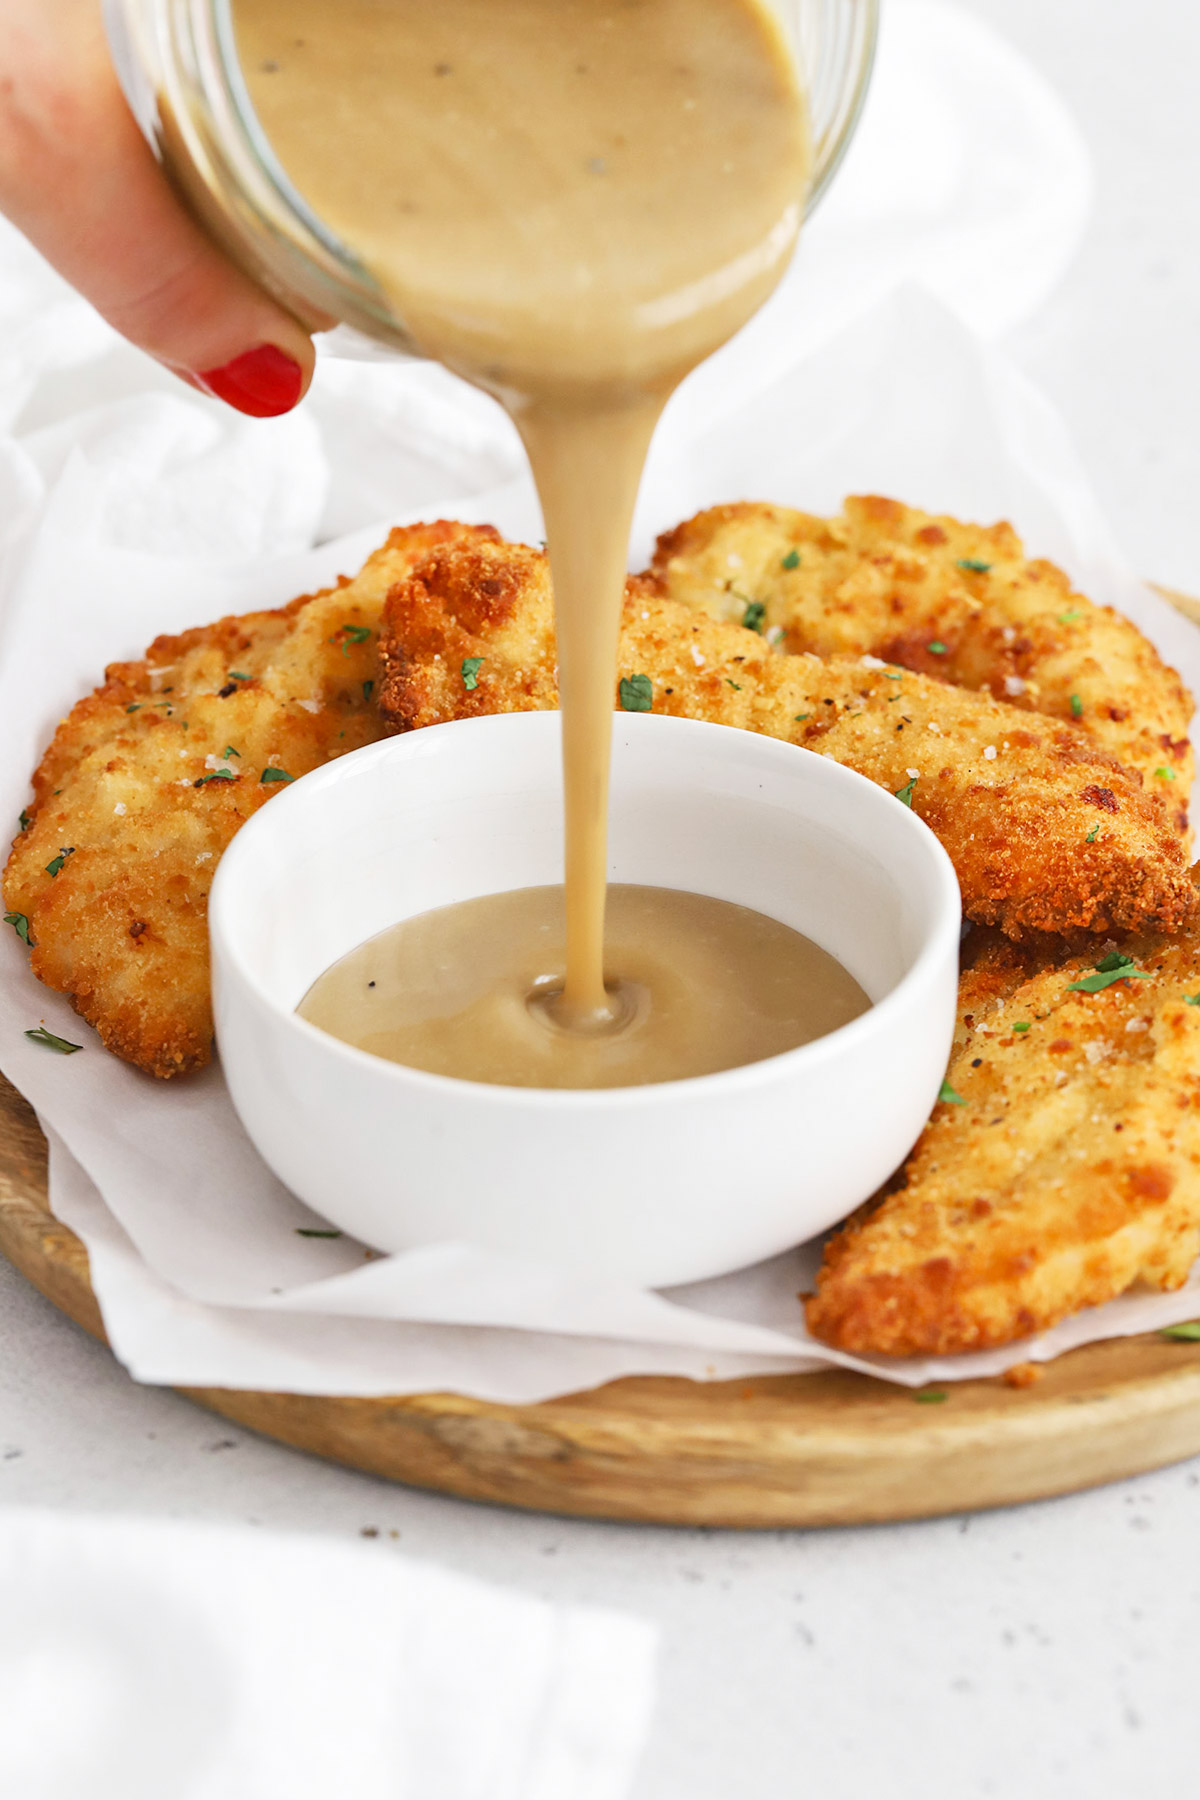 Crispy gluten-free chicken tenders served with One Lovely Life's honey mustard dipping sauce